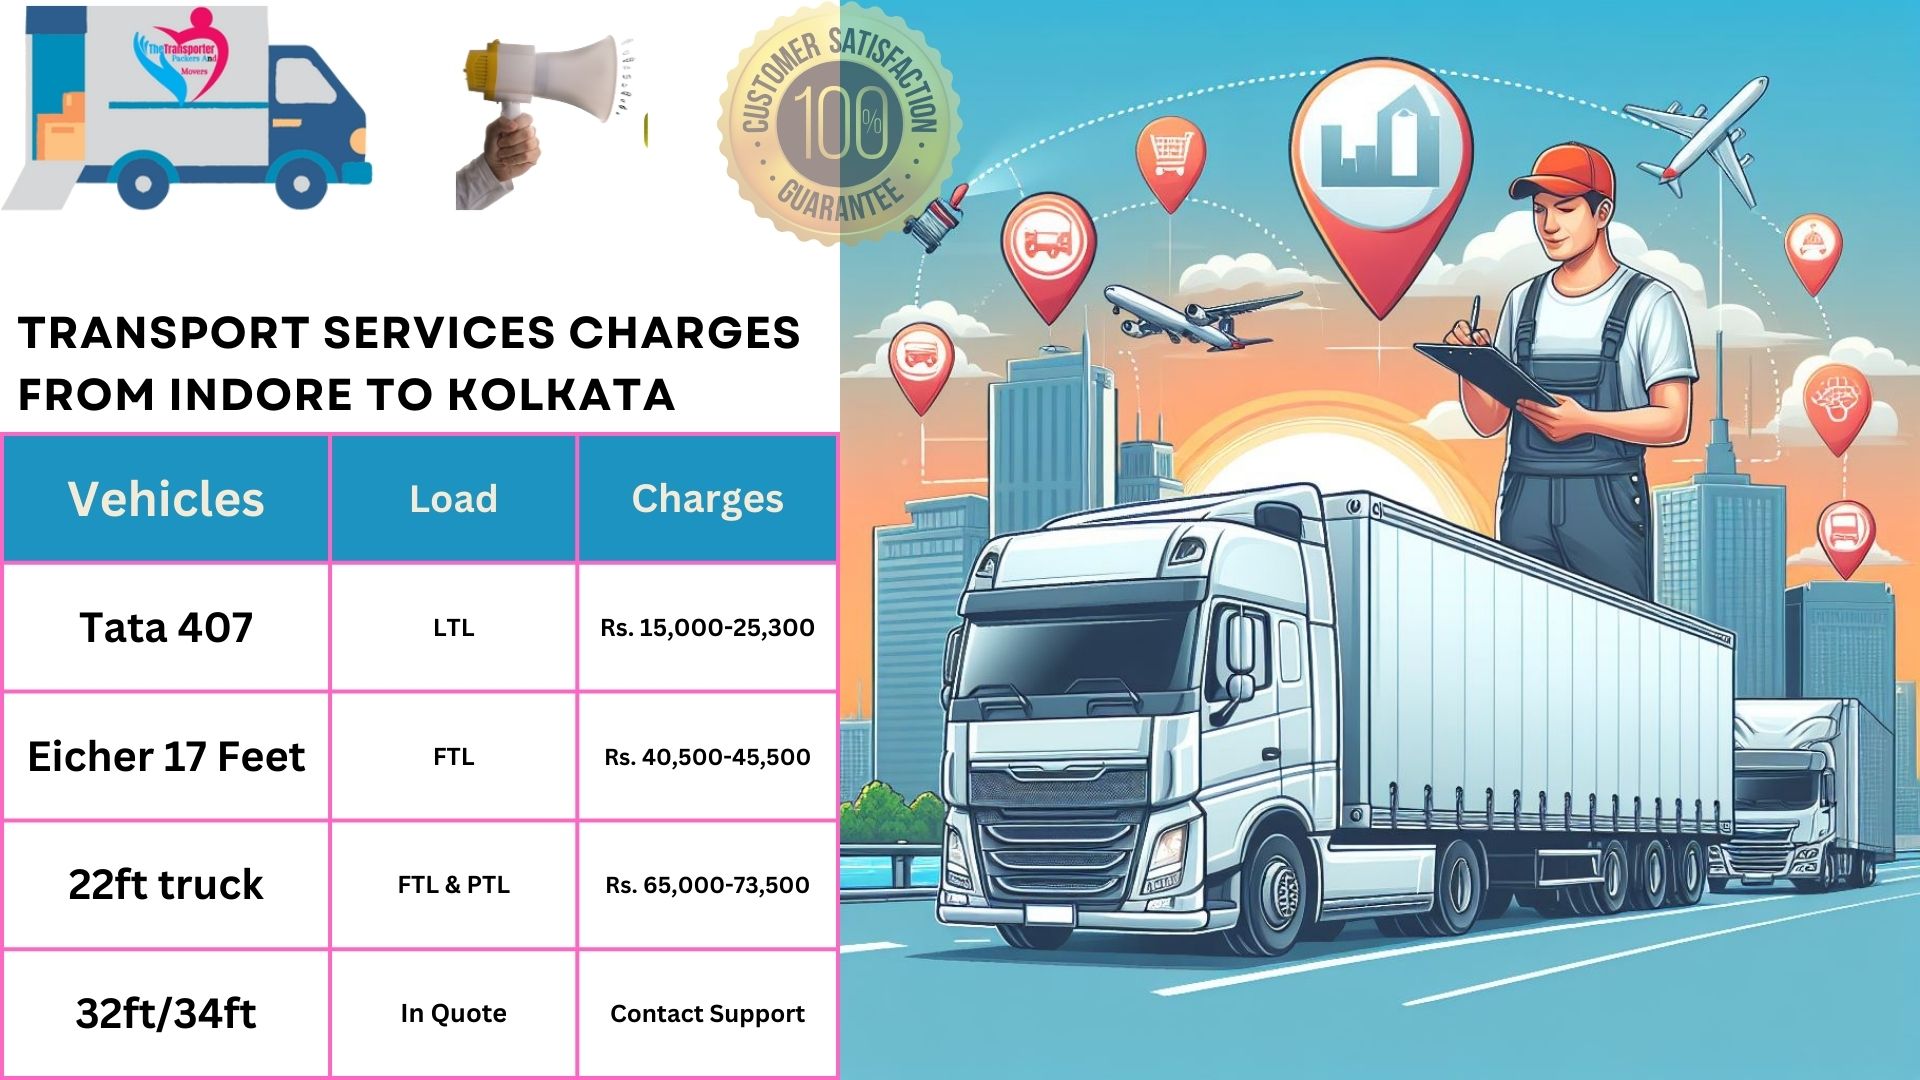 Your household goods shifting from Indore to Kolkata